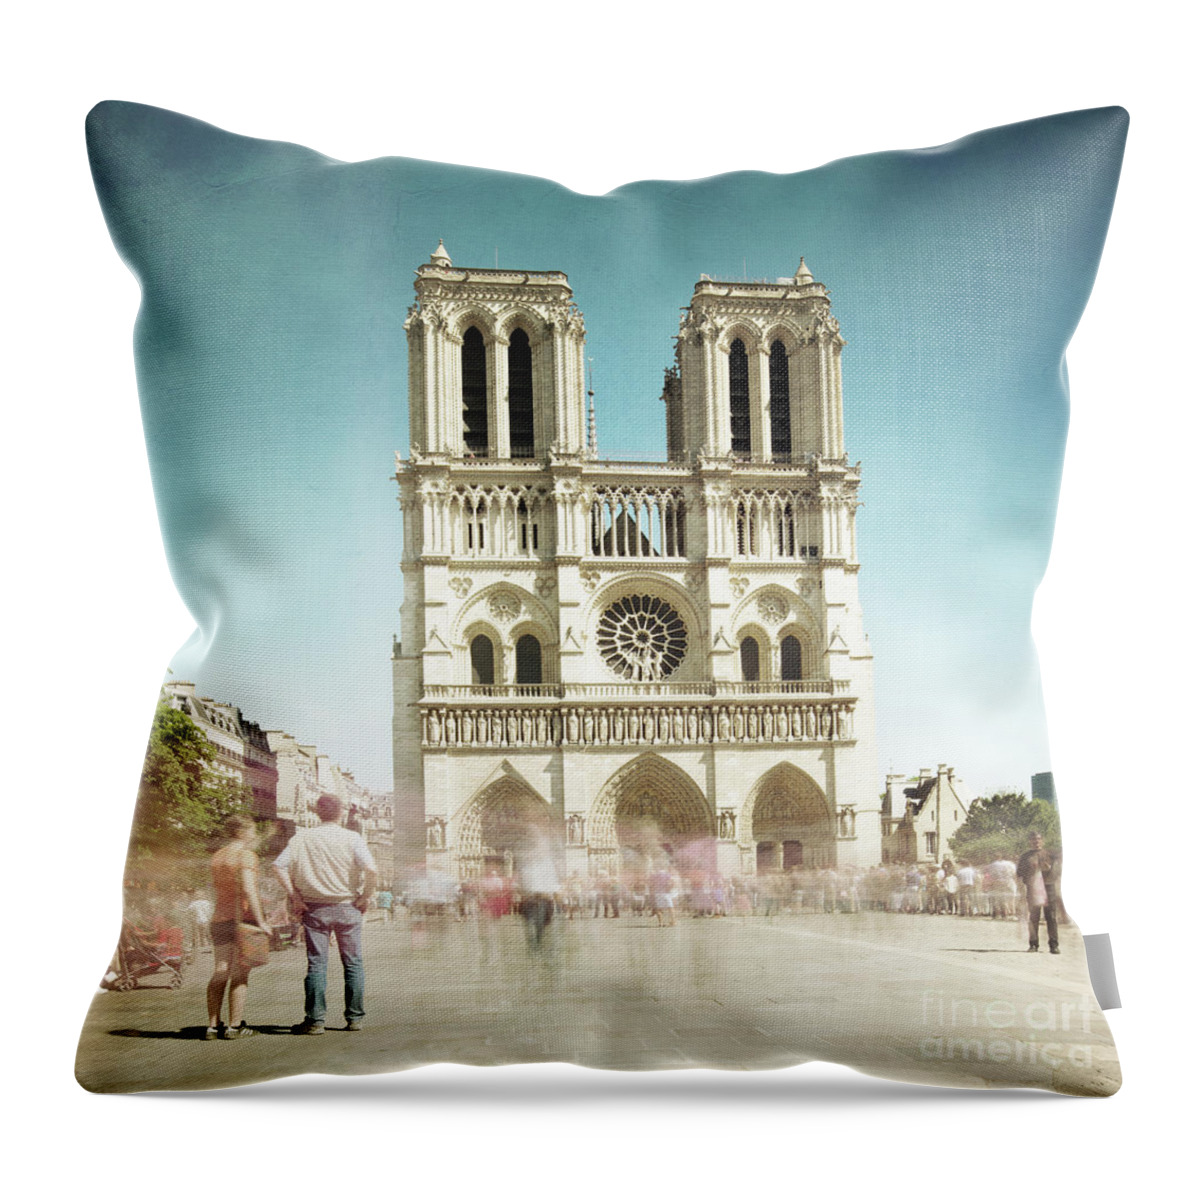 1x1 Throw Pillow featuring the photograph Notre Dame by Hannes Cmarits